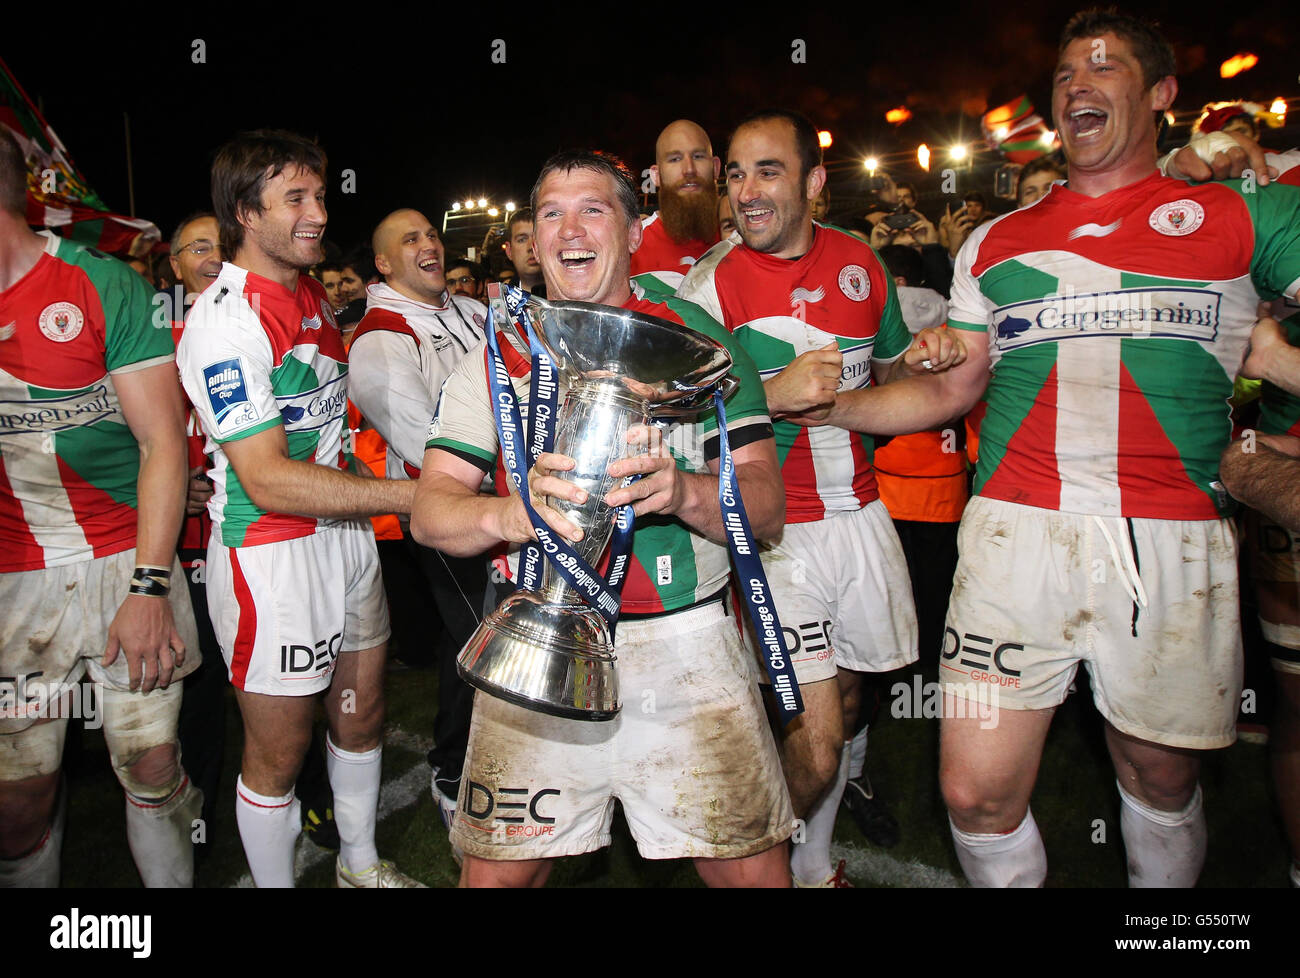 Rugby Union - Amlin Challenge Cup - finale - Biarritz Olympique Pays Basque  v Toulon - Twickenham Stoop Foto stock - Alamy